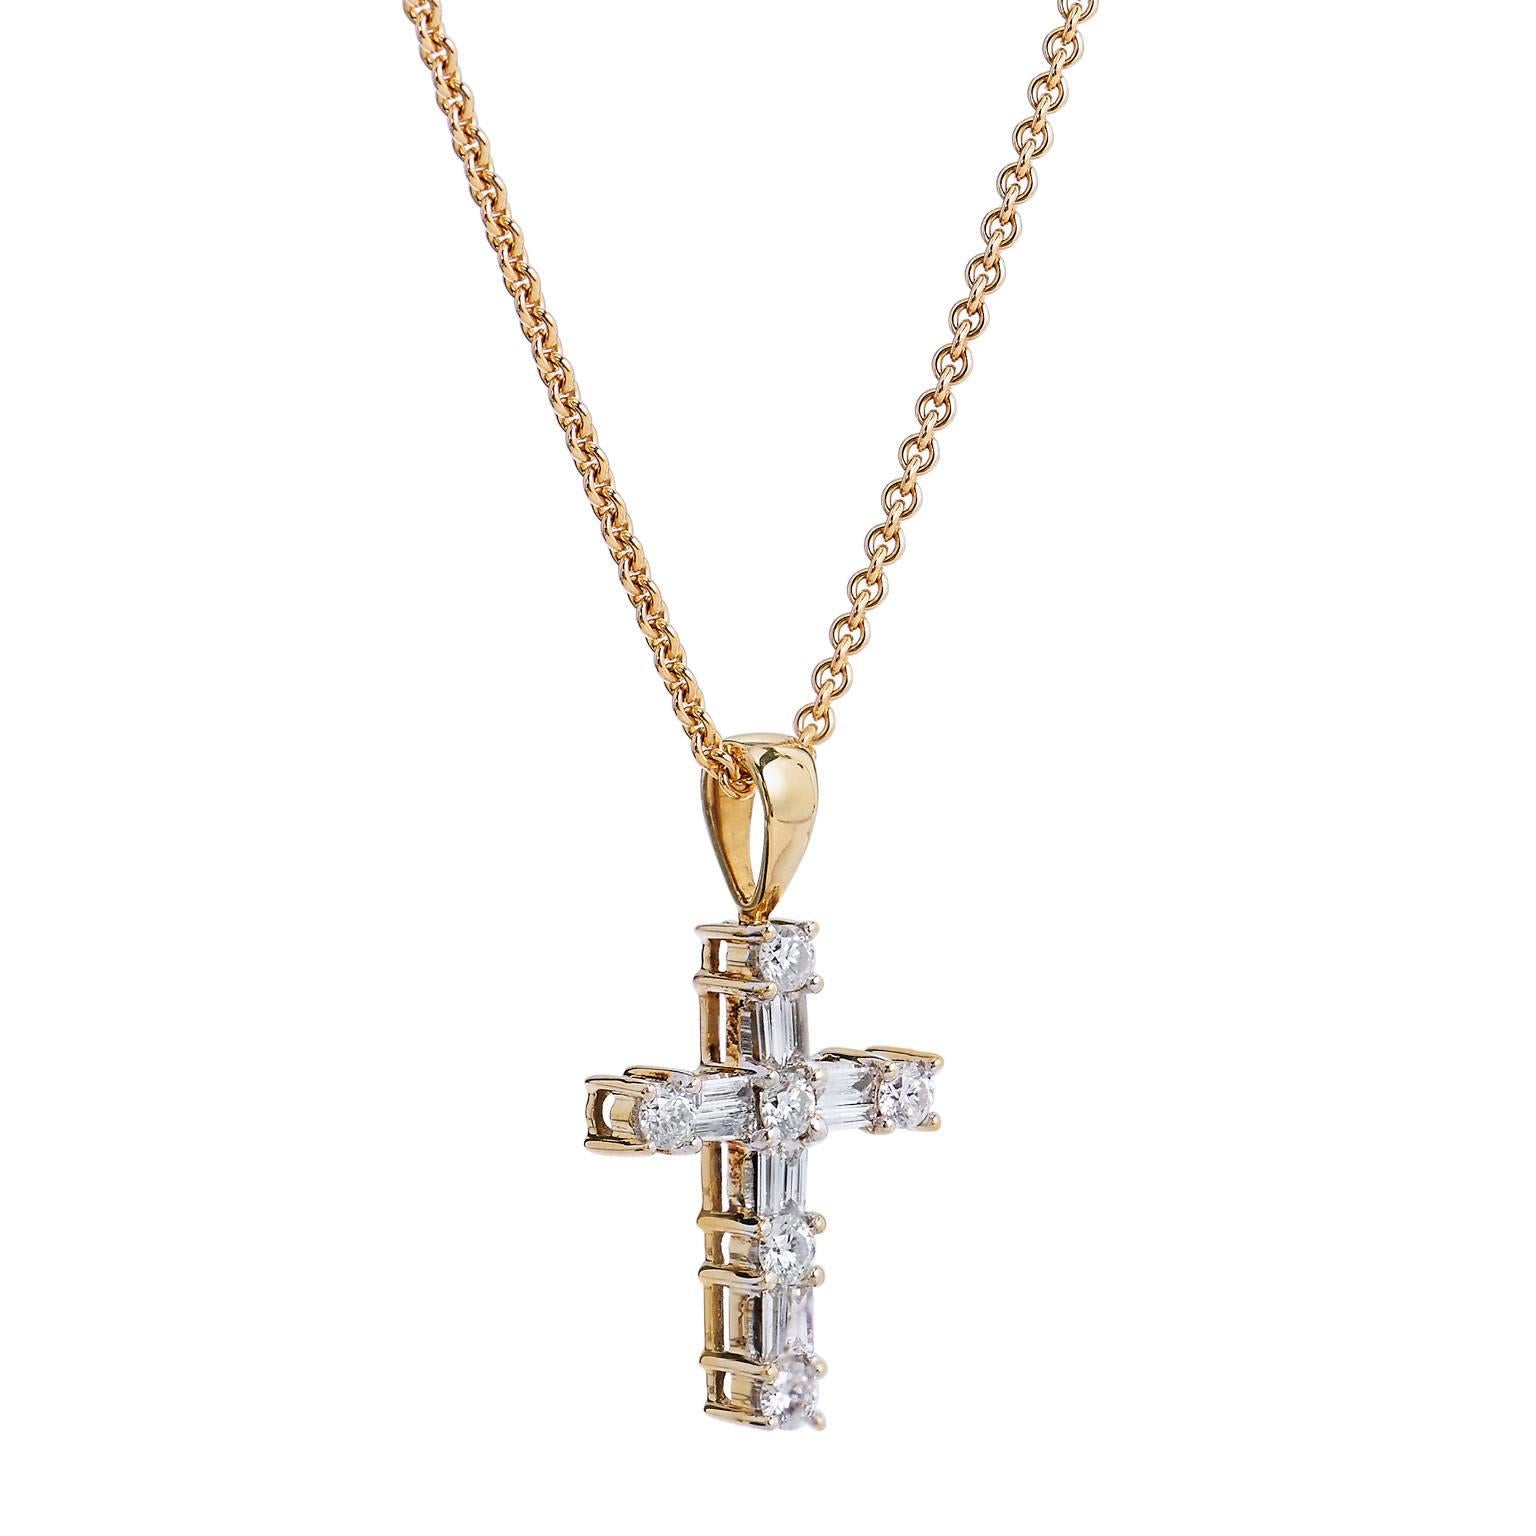 Enjoy this previously loved 14 karat yellow gold cross pendant necklace featuring a total weight of 1.00 carat of round and baguette cut diamonds (G/H/SI2) prong set in a beautiful display.
